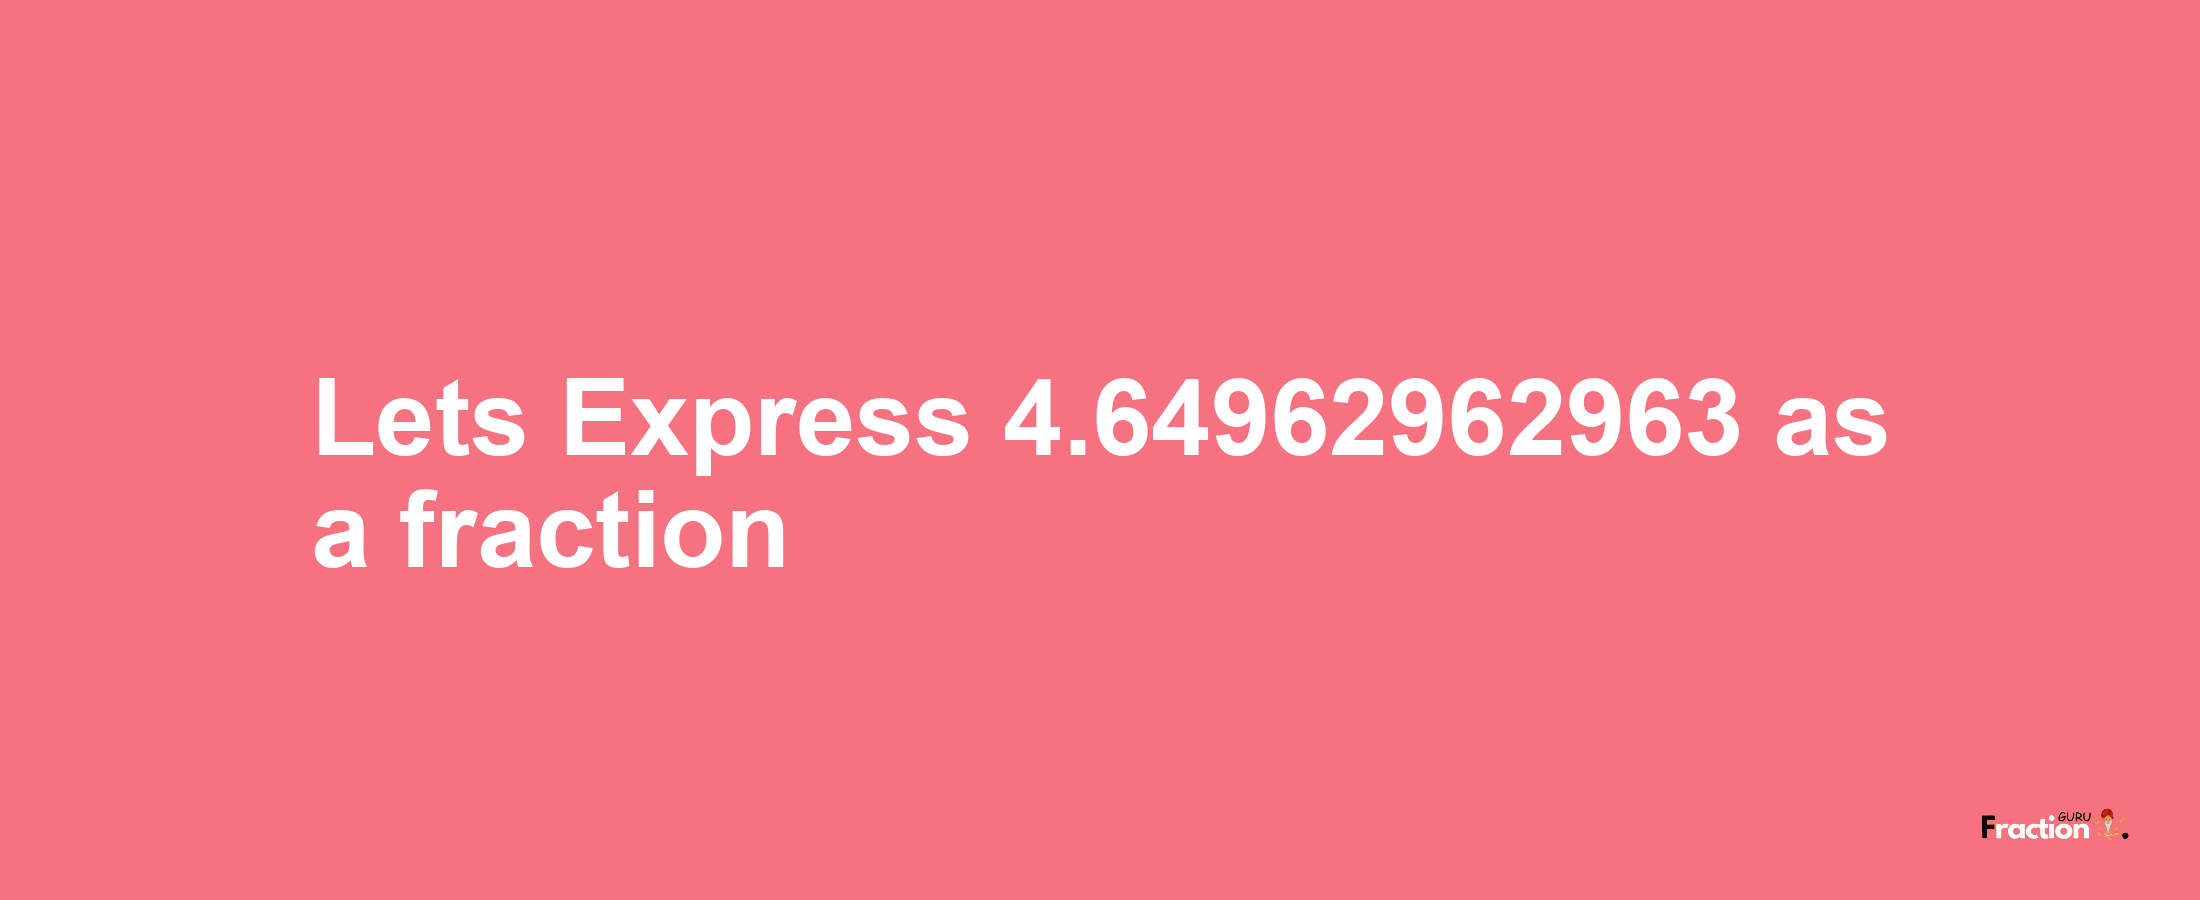 Lets Express 4.64962962963 as afraction